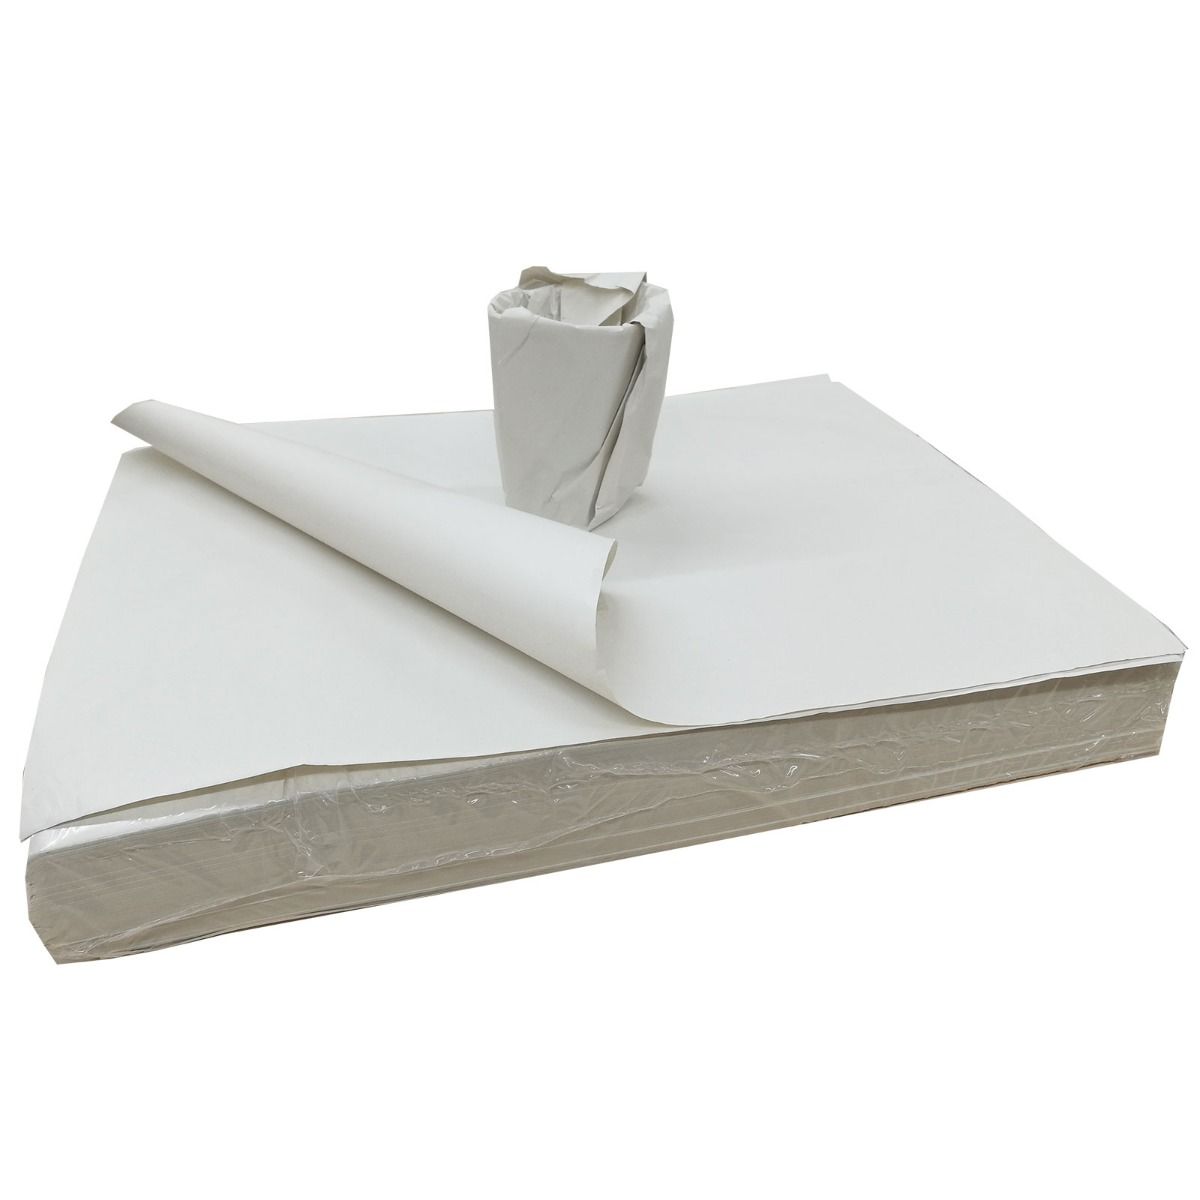 Packing Paper Sheets for Moving Supplies, Newsprint Paper Sheets for Moving  Boxe